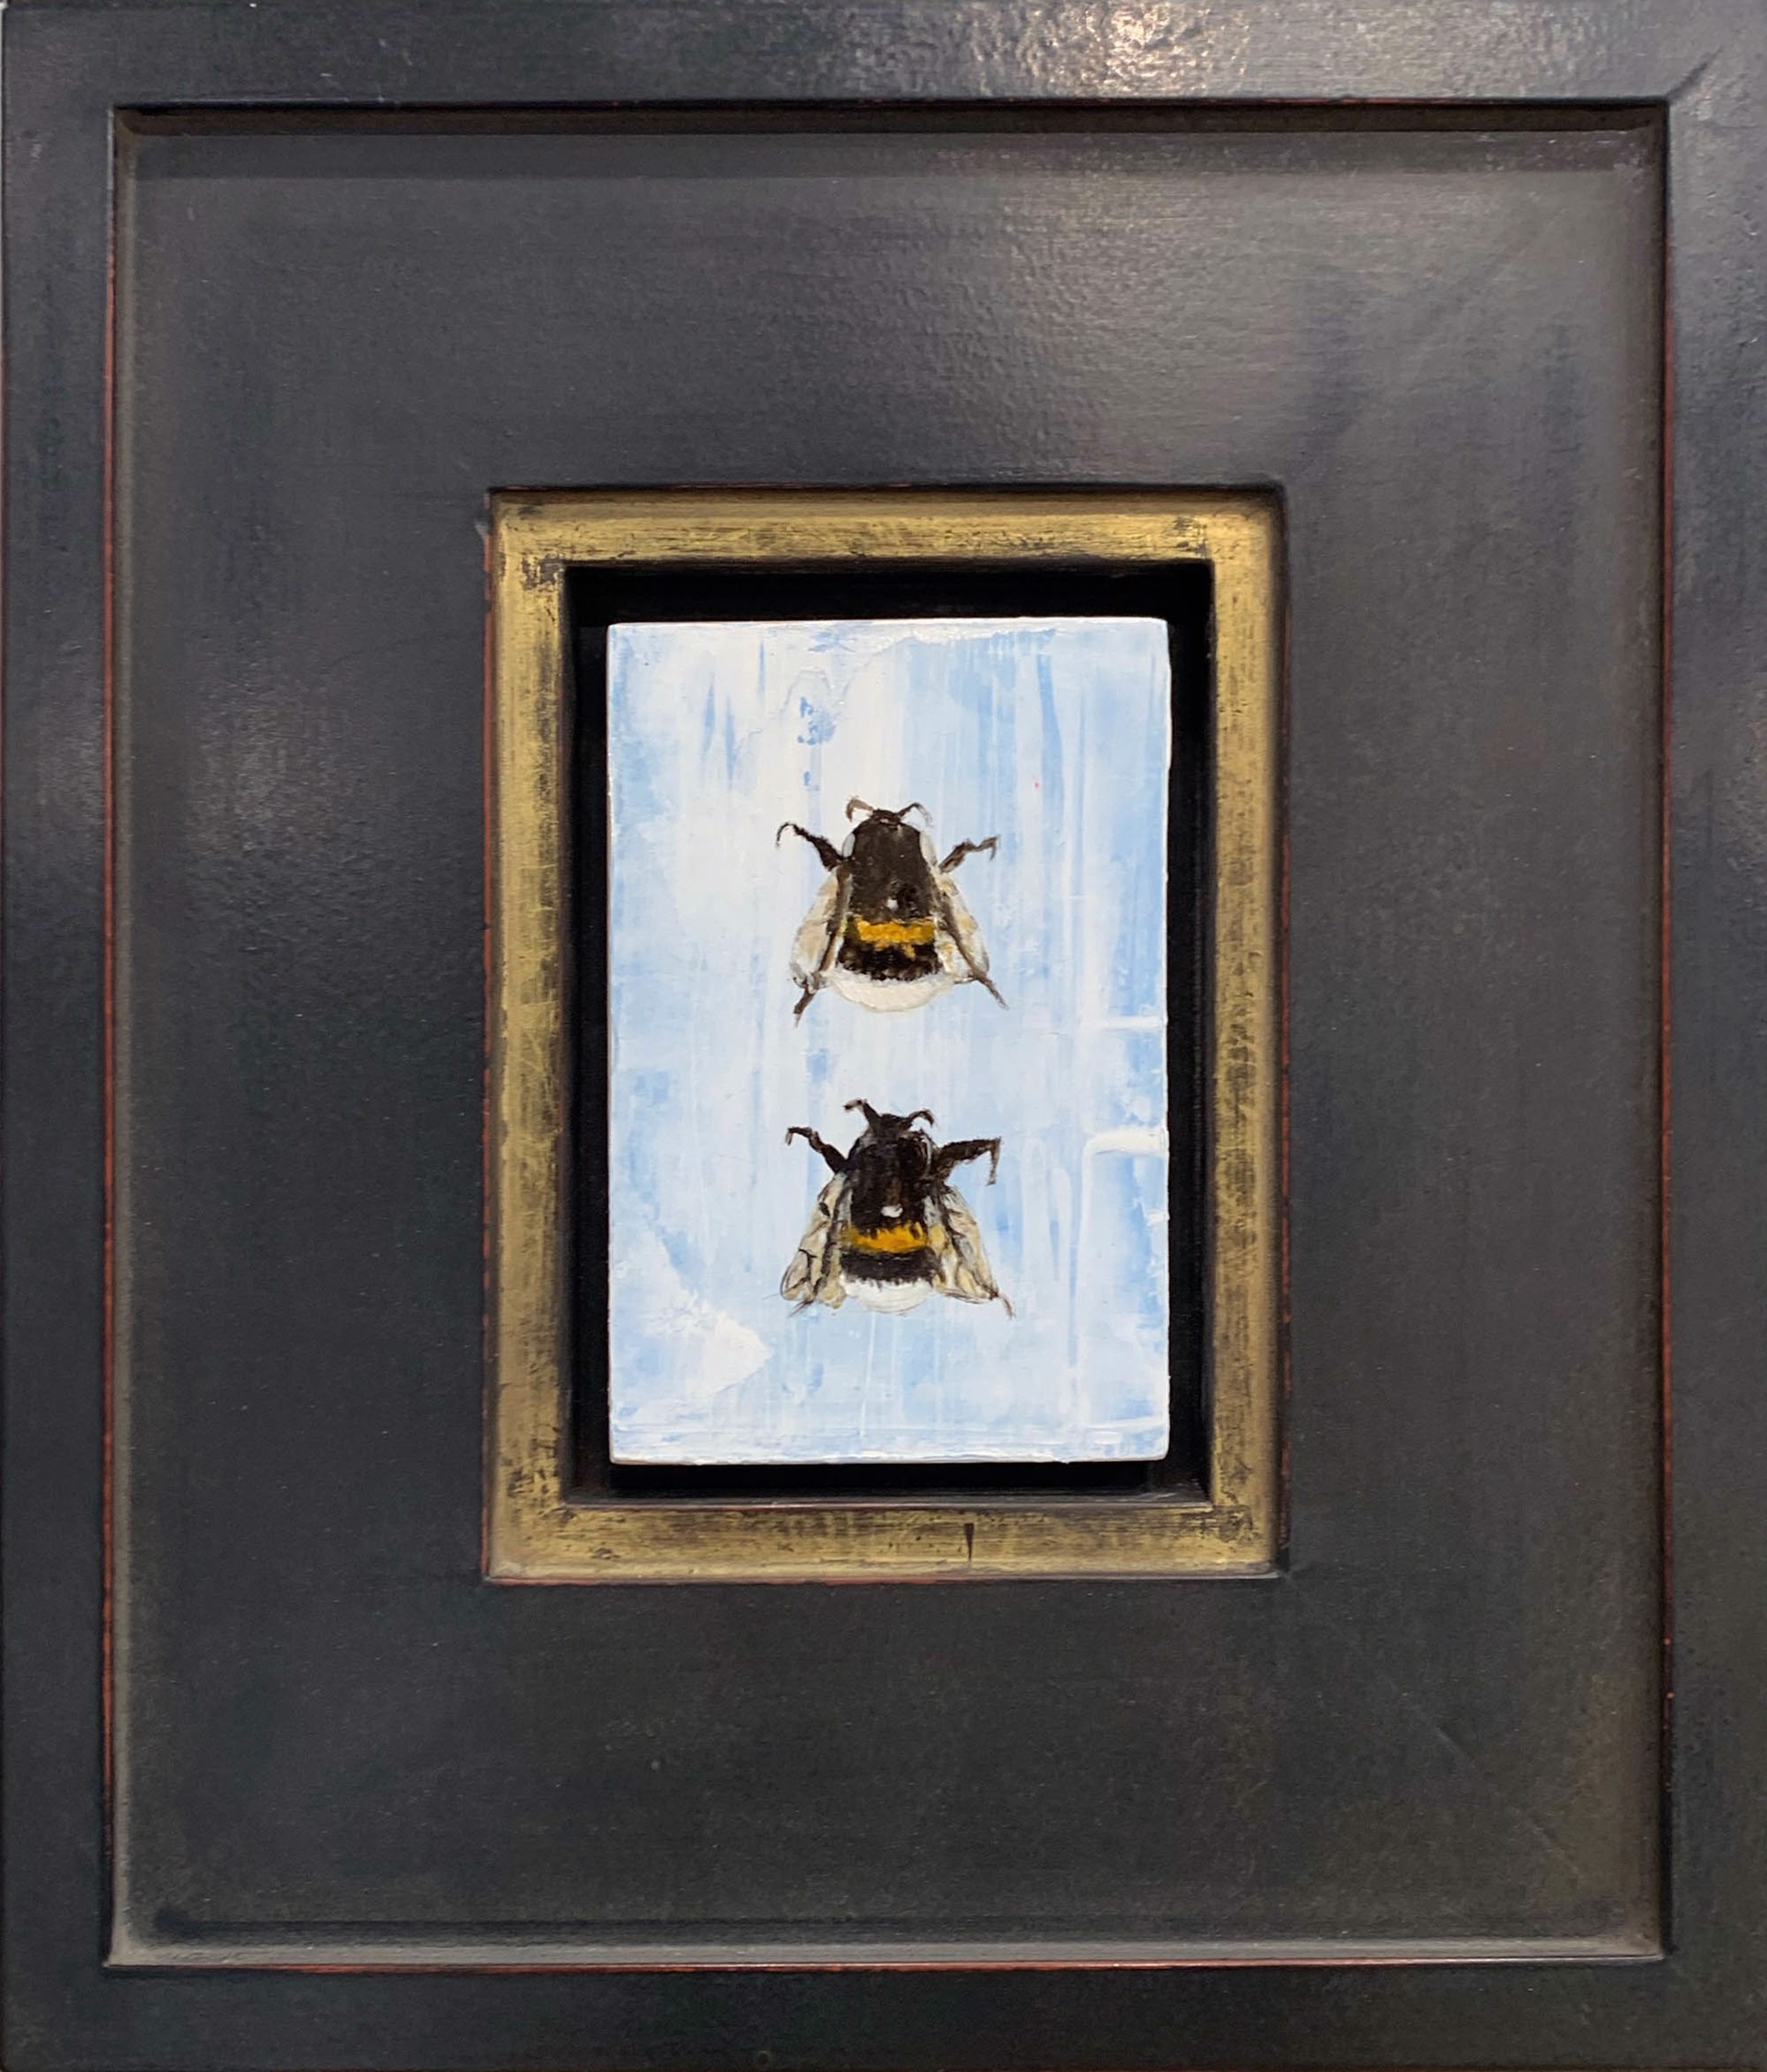 An Original Oil Painting Of Two Bees With An Abstract Blue Background With A Black And Gold Frame, By Jenna Von Benedikt